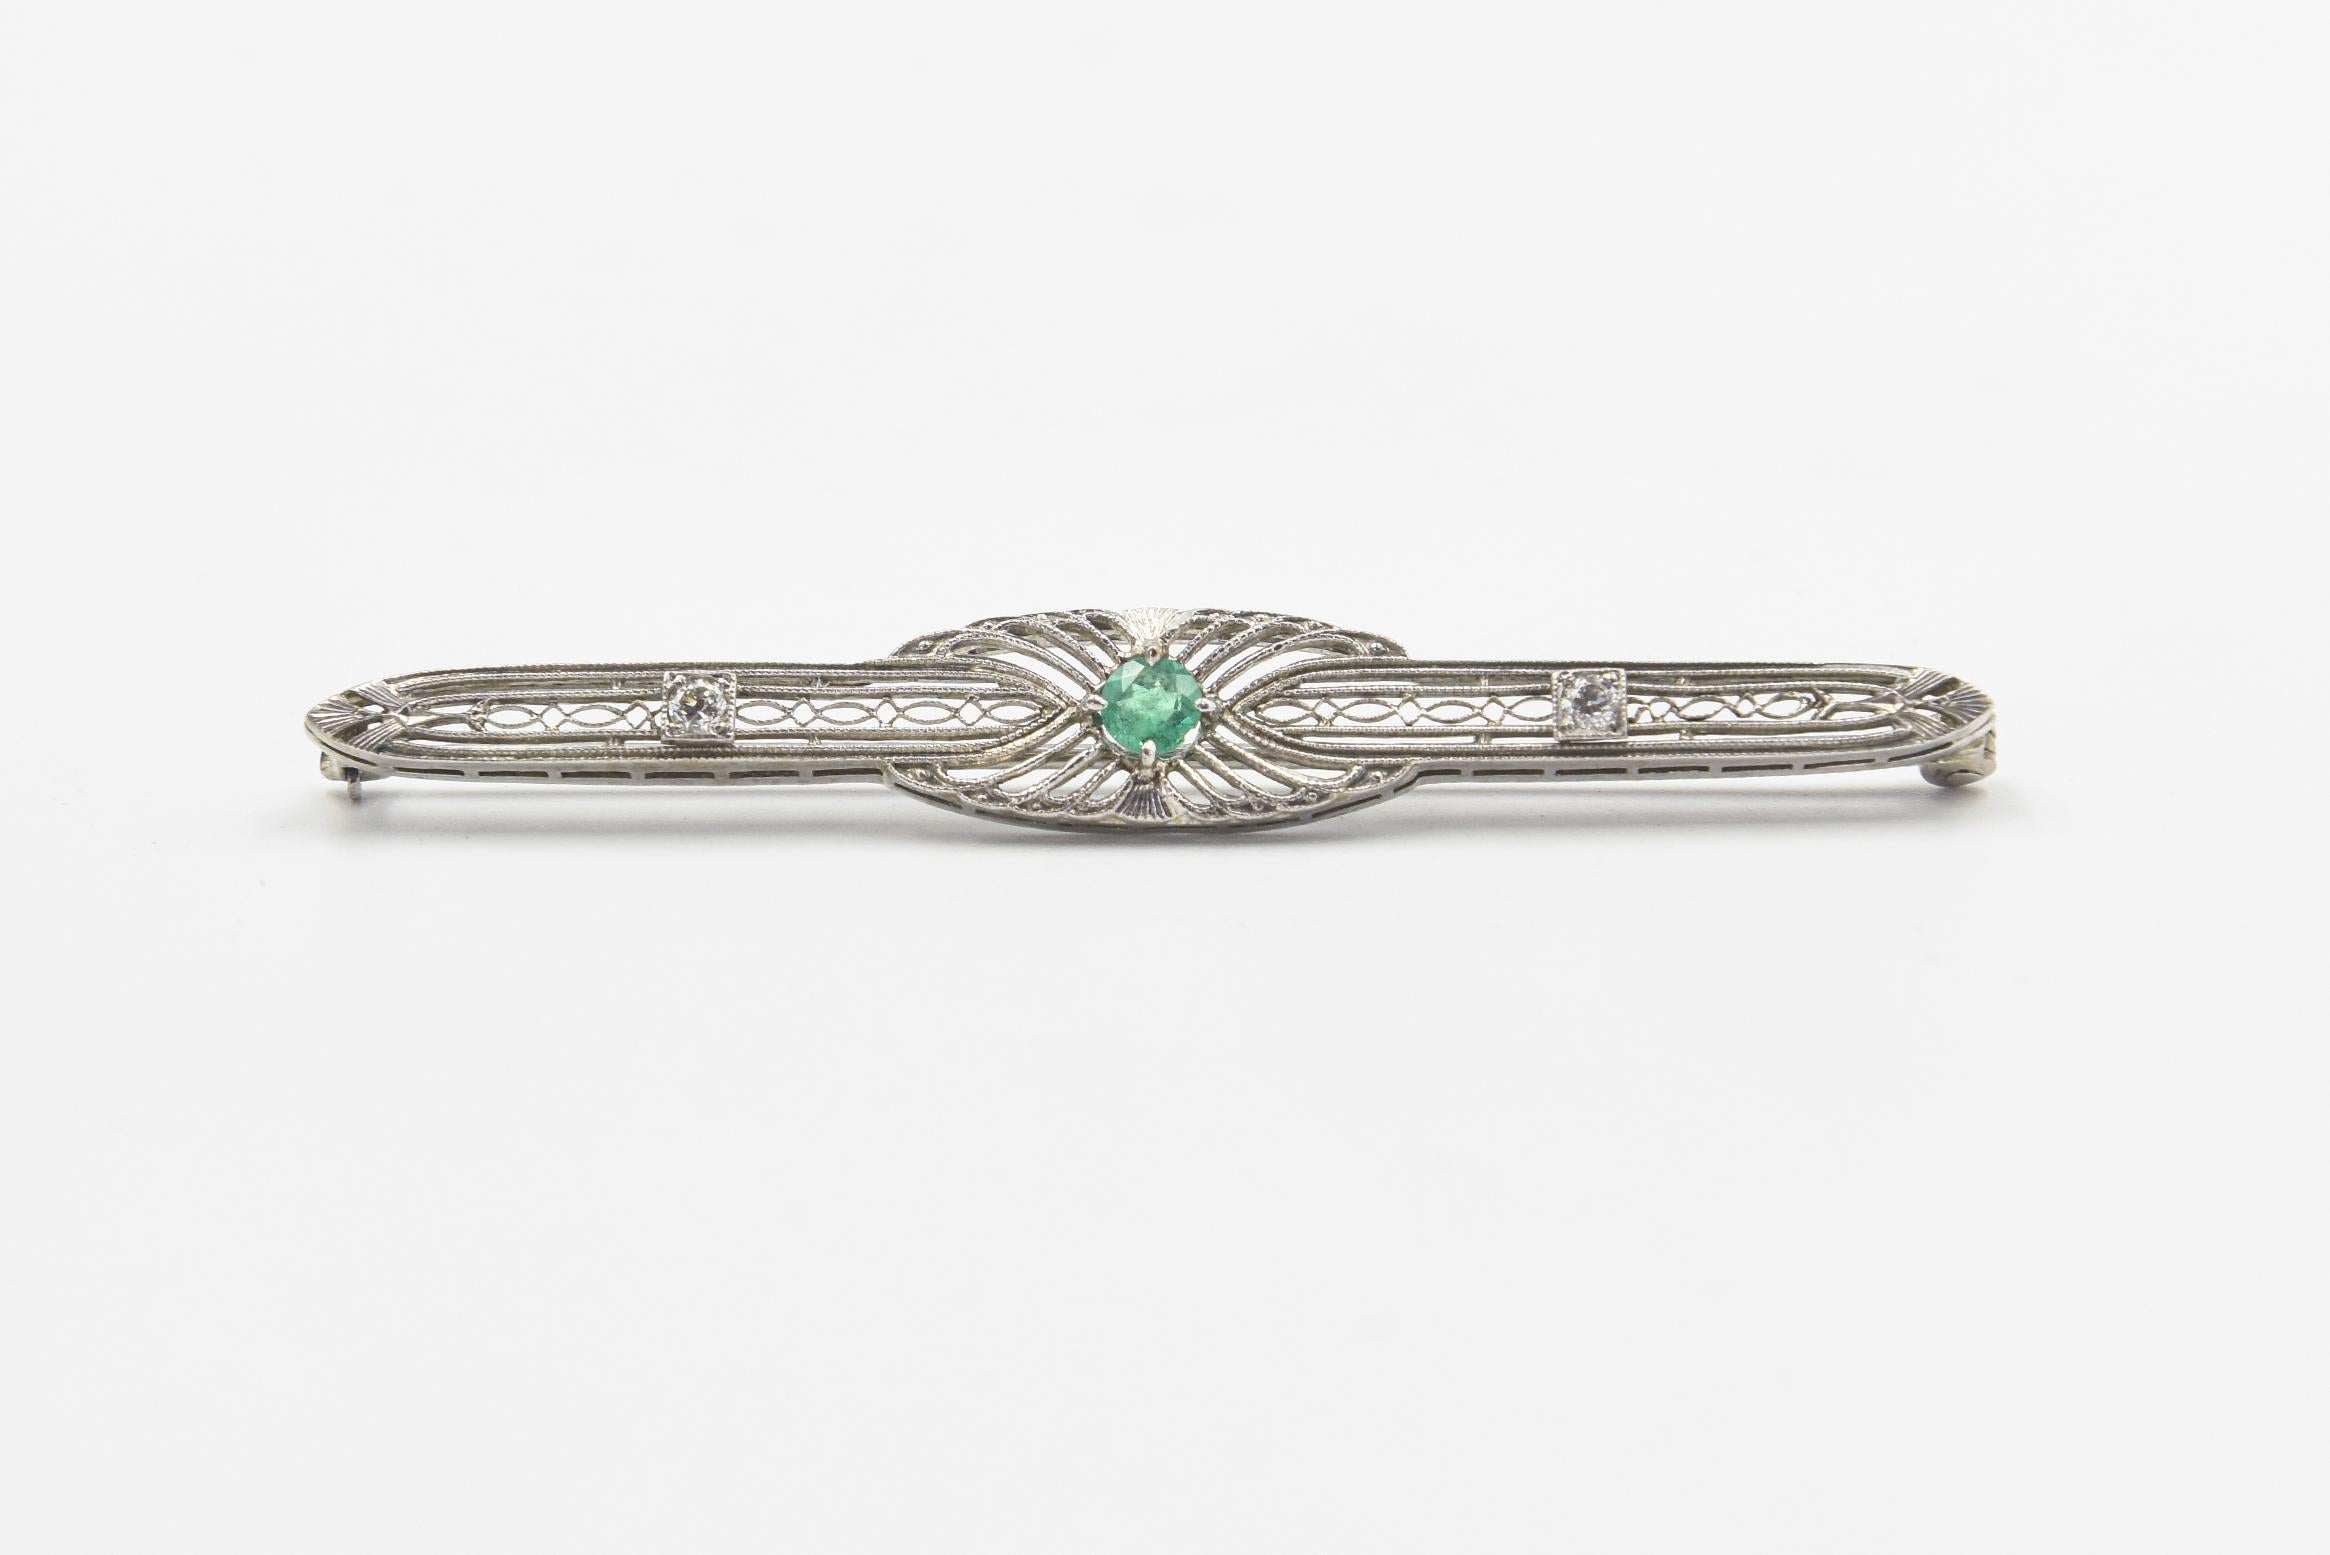 Early 20th Century antique bar brooch featuring a centrally set emerald in a 18k white gold filagree brooch with 2 round diamond accents.  The piece tested 18k with a metal testing gun. It has odd hallmarks that I do not recognize.